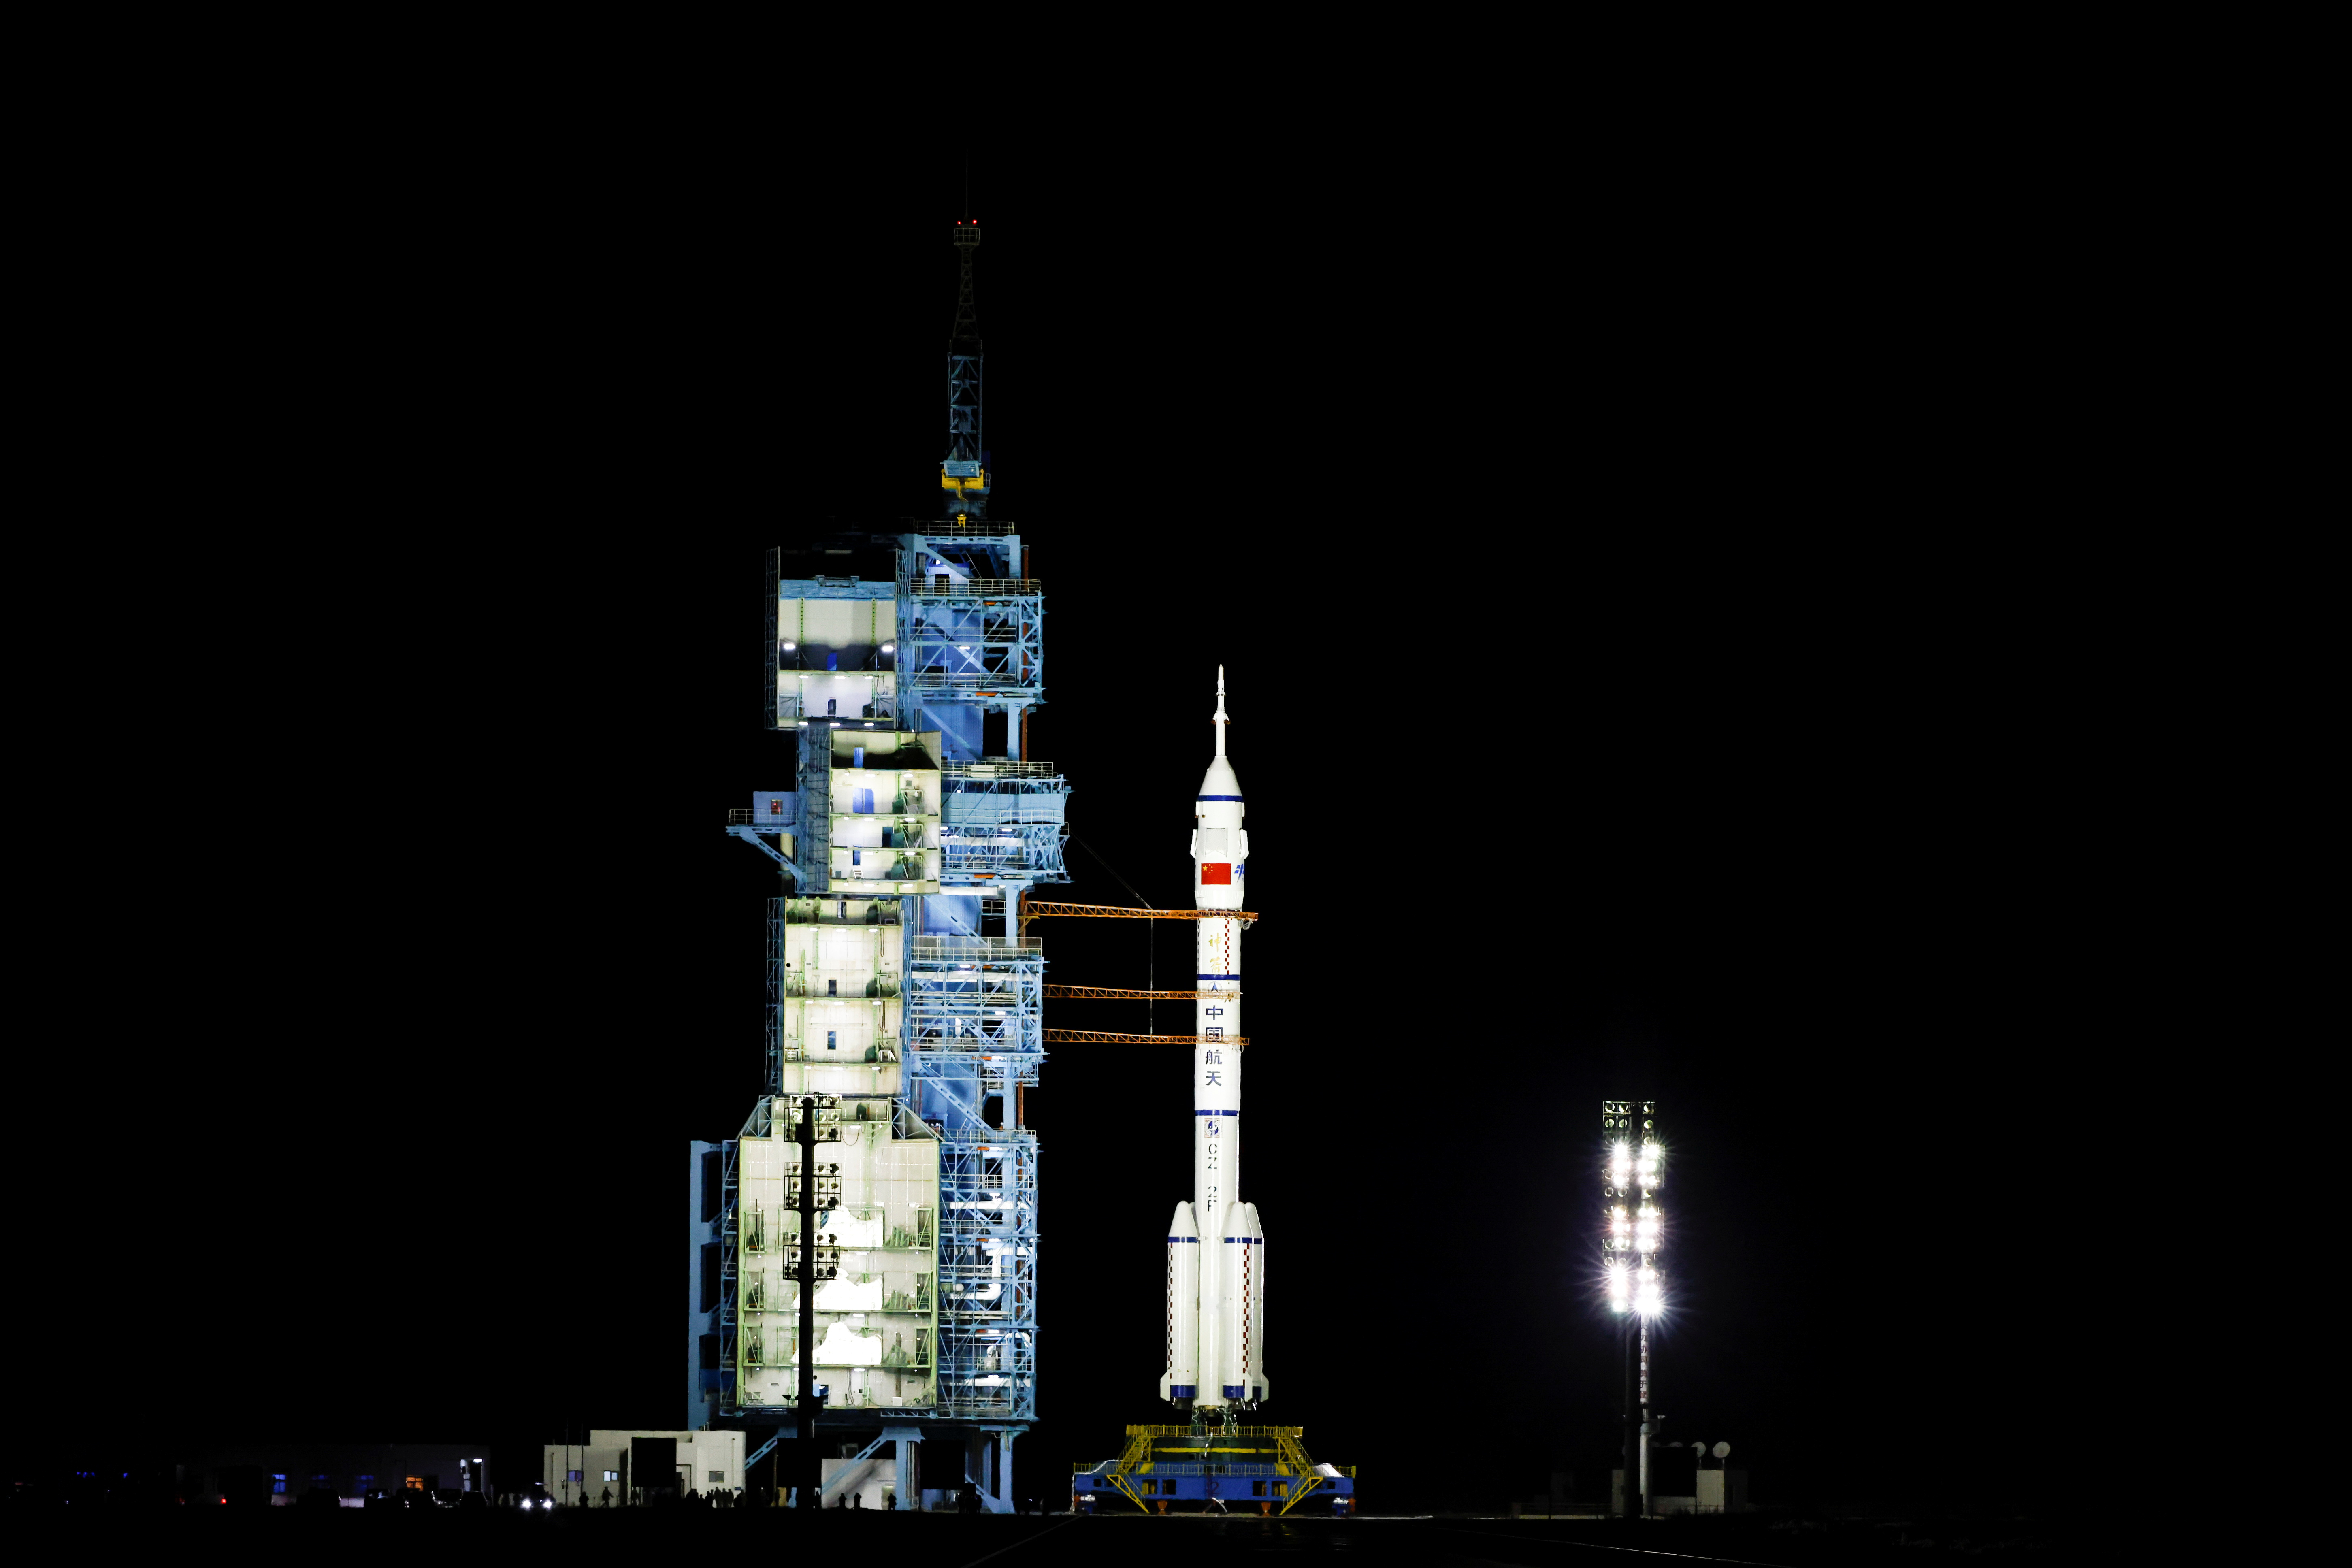 A general view of the Long March-2F Y13 rocket, carrying the Shenzhou-13 spacecraft and three astronauts in China's second crewed mission to build its own space station, before its launch at Jiuquan Satellite Launch Center near Jiuquan, Gansu province, China October 15, 2021. REUTERS/Carlos Garcia Rawlins